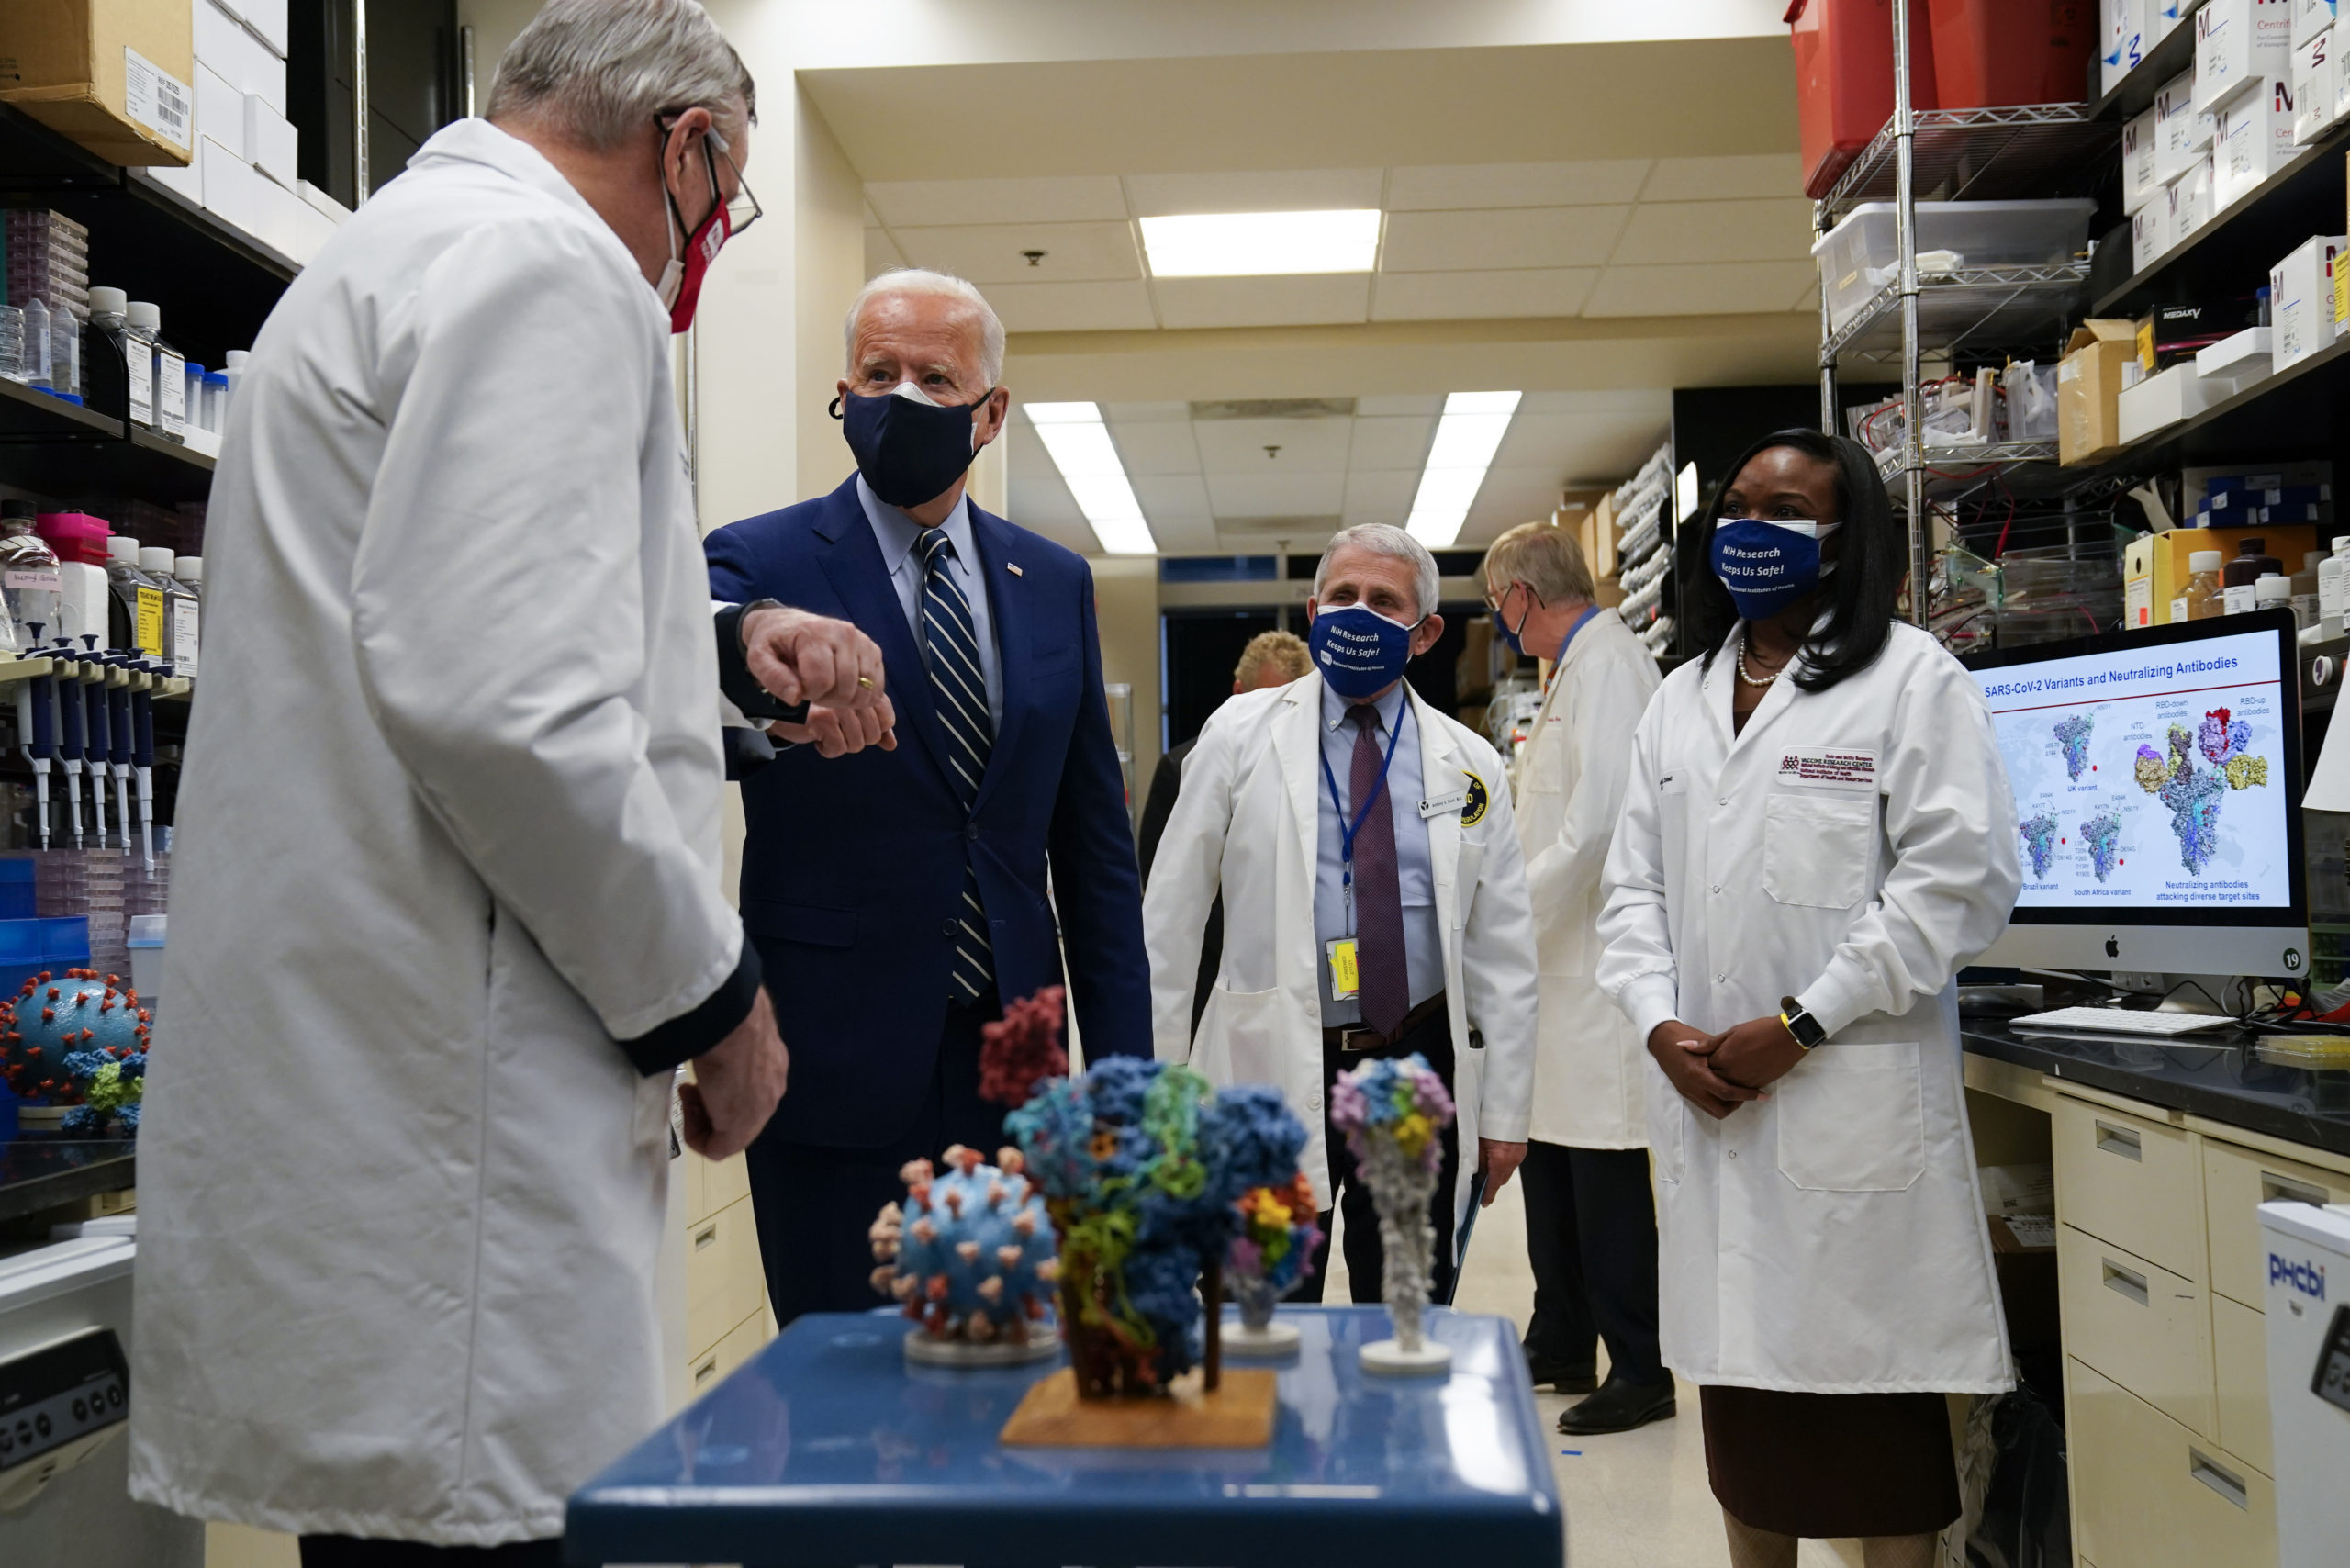 President Joe Biden greets Barney Graham, left, as he visits the Viral Pathogenesis Laboratory at the National Institutes of Health in Feb. 2021